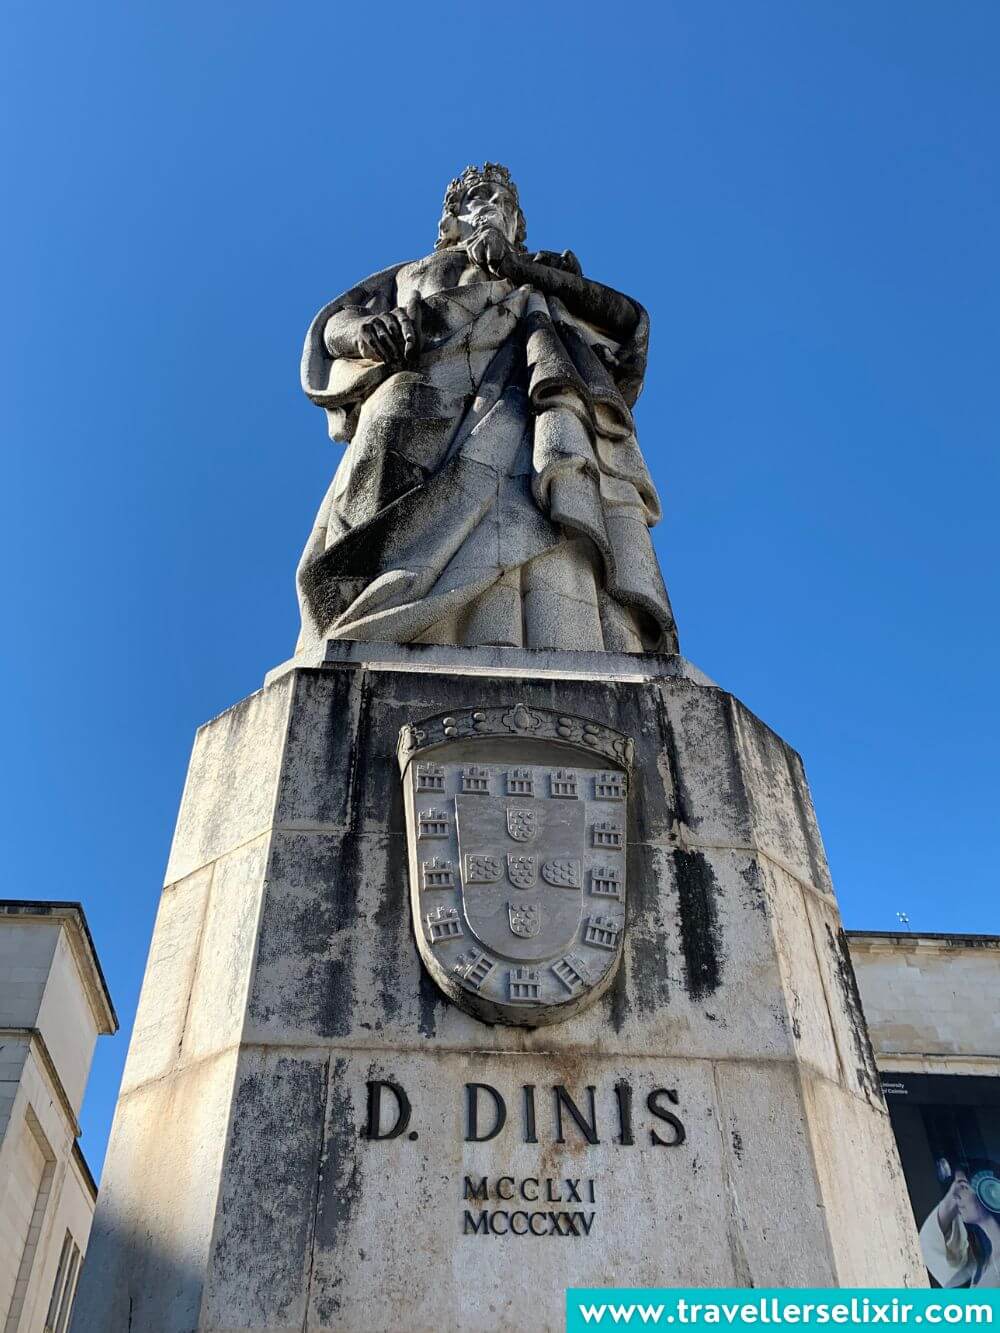 Statue of King Dinis in Coimbra.